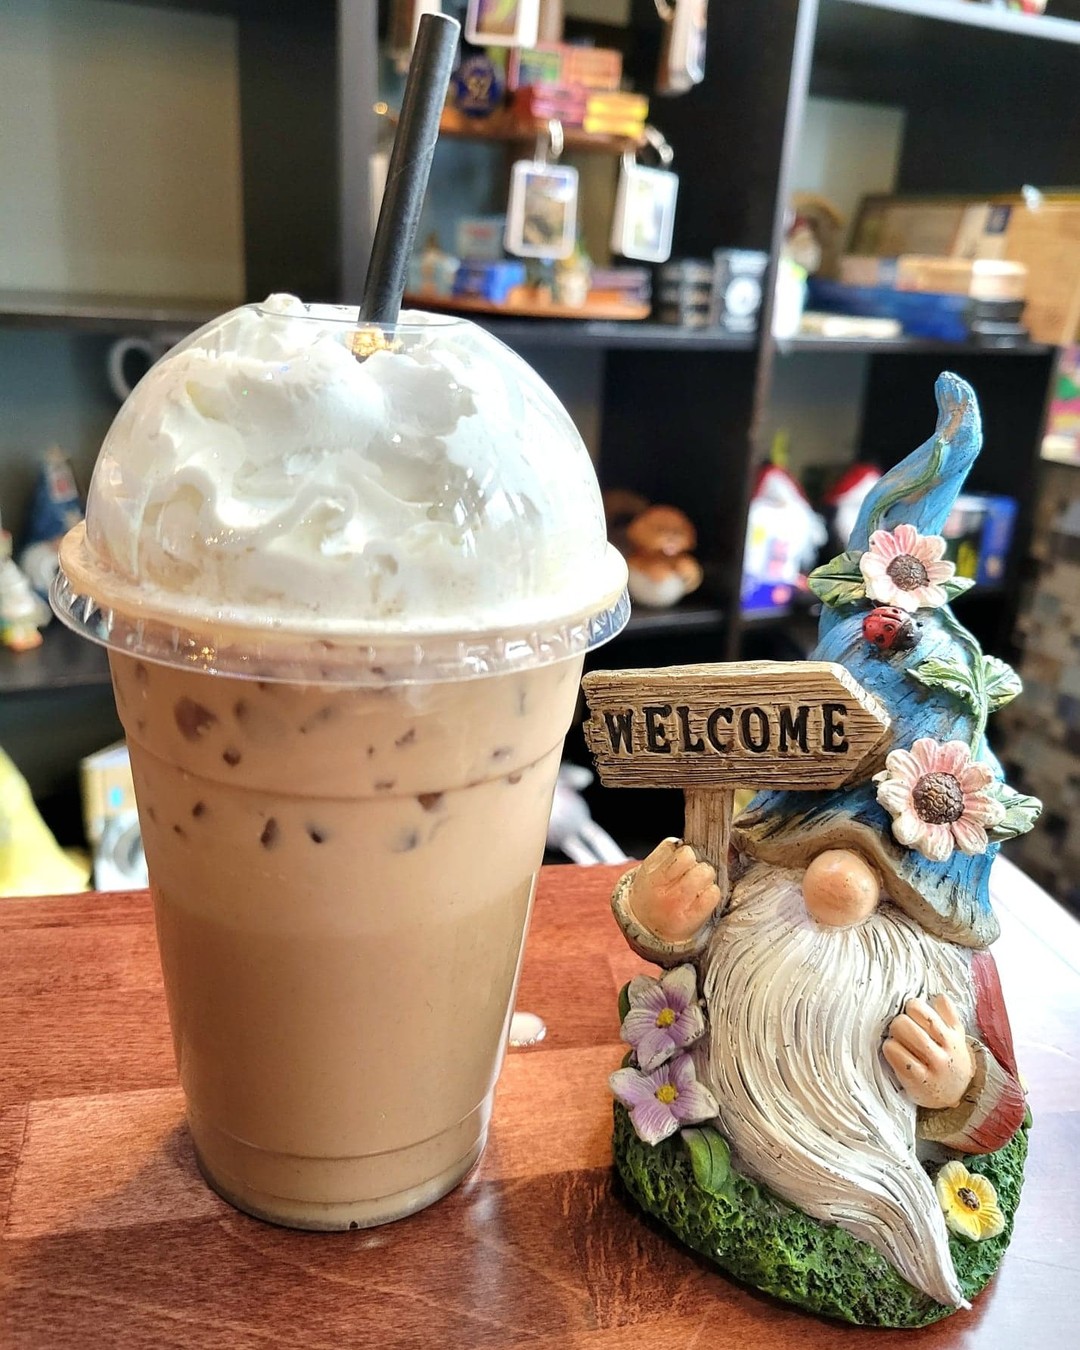 If your fixing for a delicious Iced Latte, think about stopping in a The Gnoshery! The iced latte in this picture is blueberry flavored, the perfect drink as the weather starts to warm!

#gnoshery #gnomegames #coffee #tea #latte